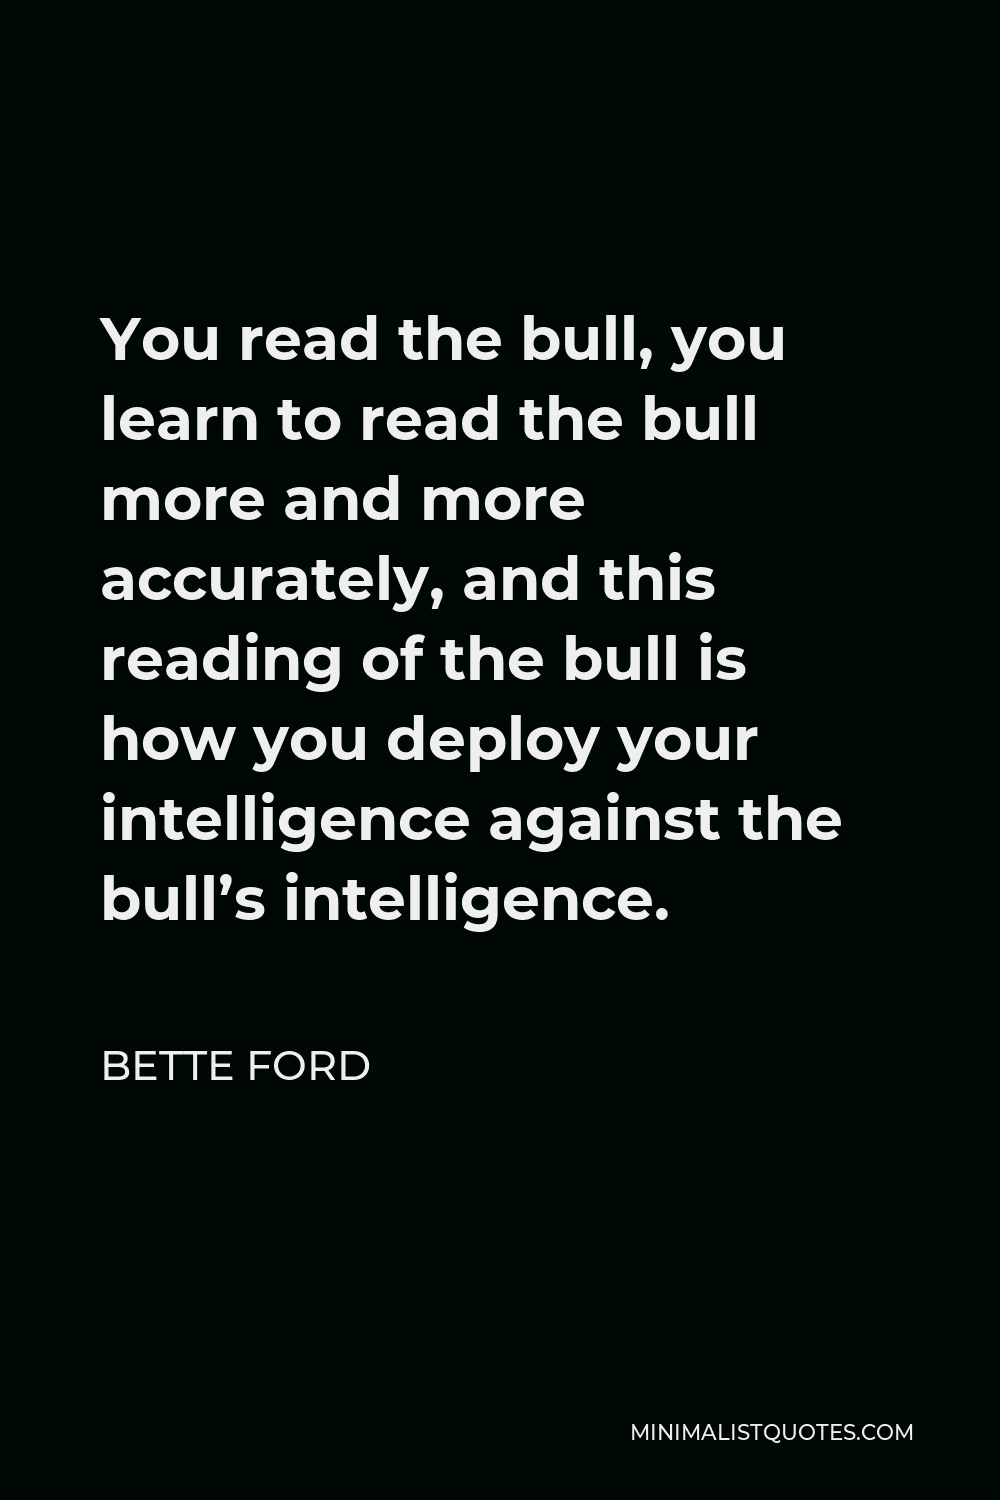 Bette Ford Quote - You read the bull, you learn to read the bull more and more accurately, and this reading of the bull is how you deploy your intelligence against the bull’s intelligence.